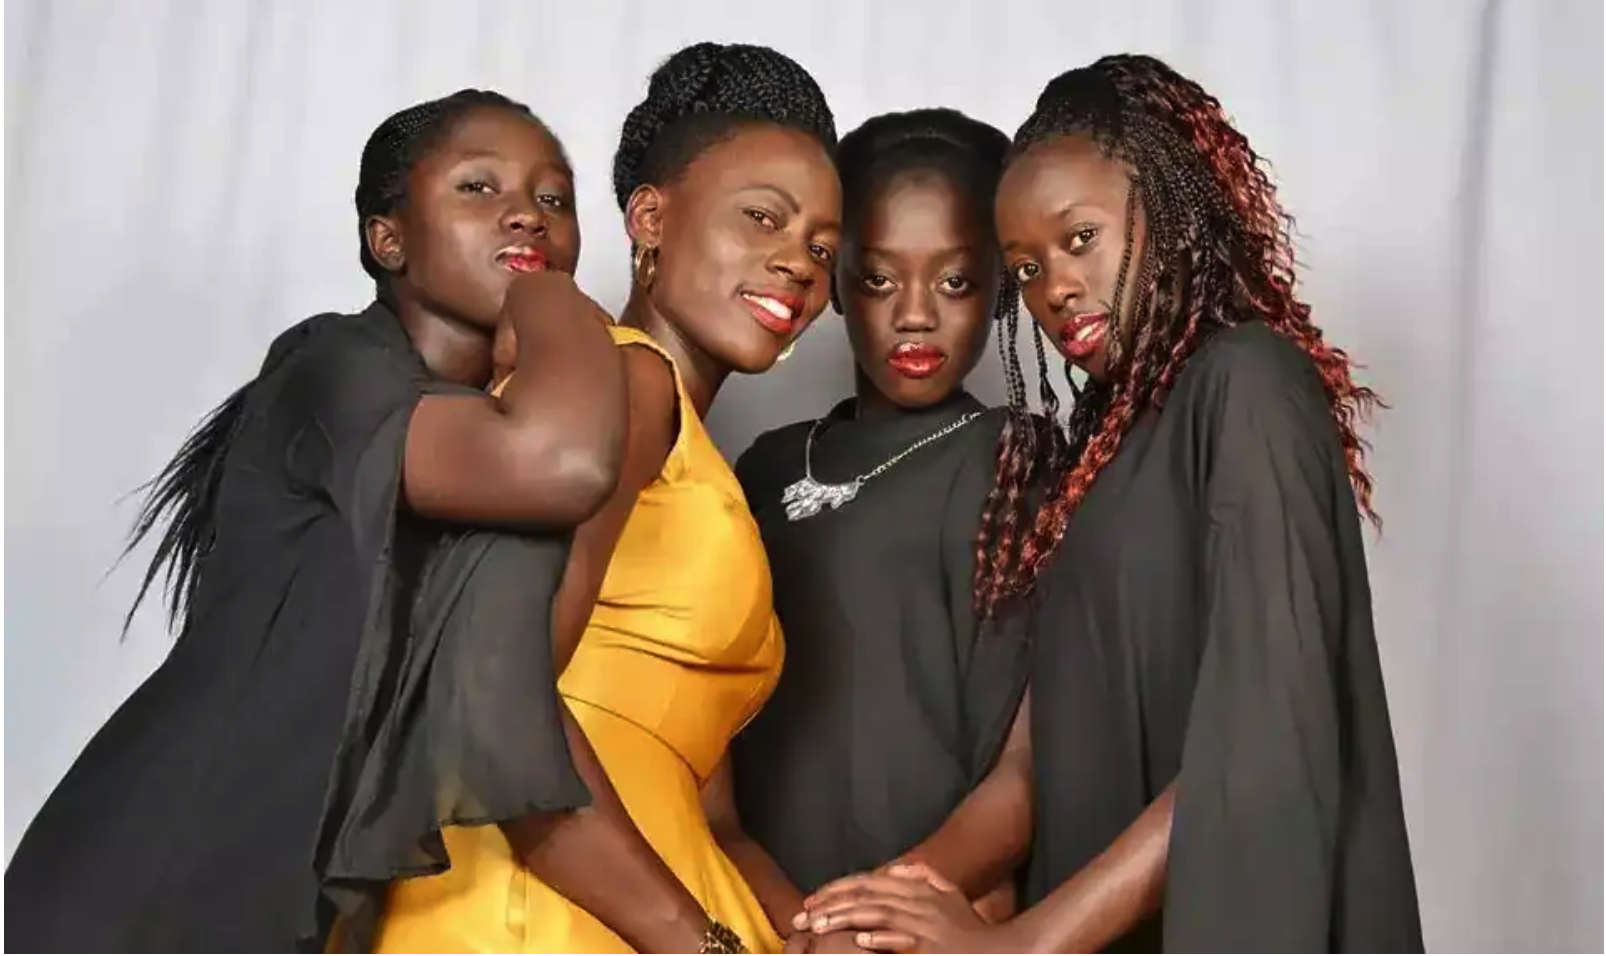 Akothee says she spent Sh12 million educating her young daughter